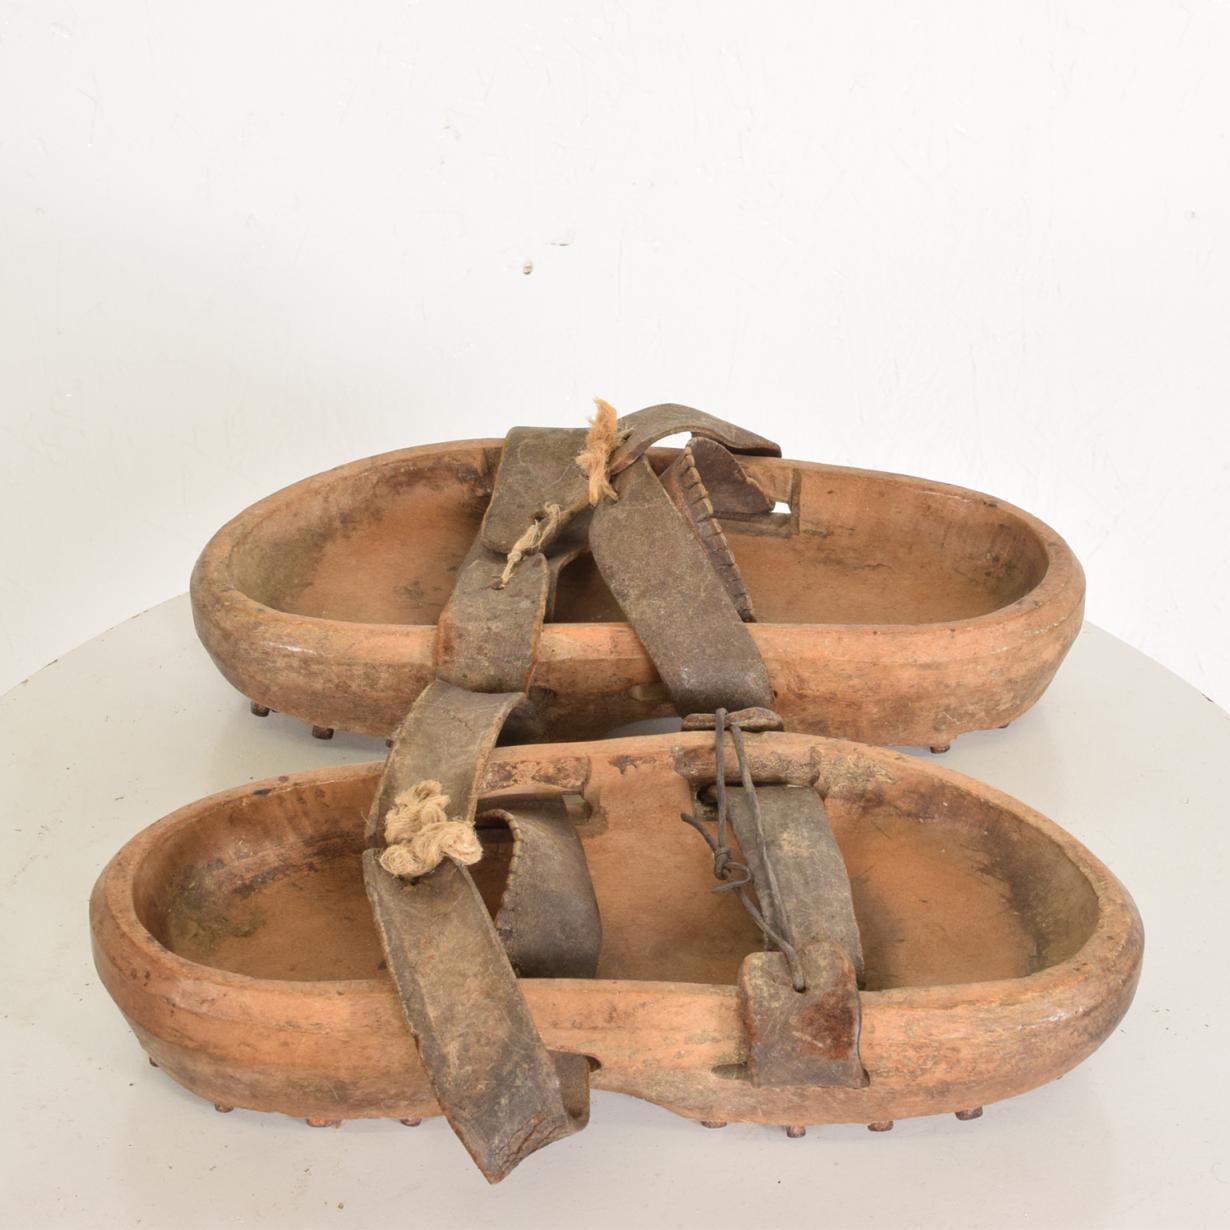 For your consideration a set of antique wood and leather shoes with metal spikes.

A beautiful character with the original unrestored condition. 

Unsigned, no information on the maker. 

Dimensions: 11 1/2